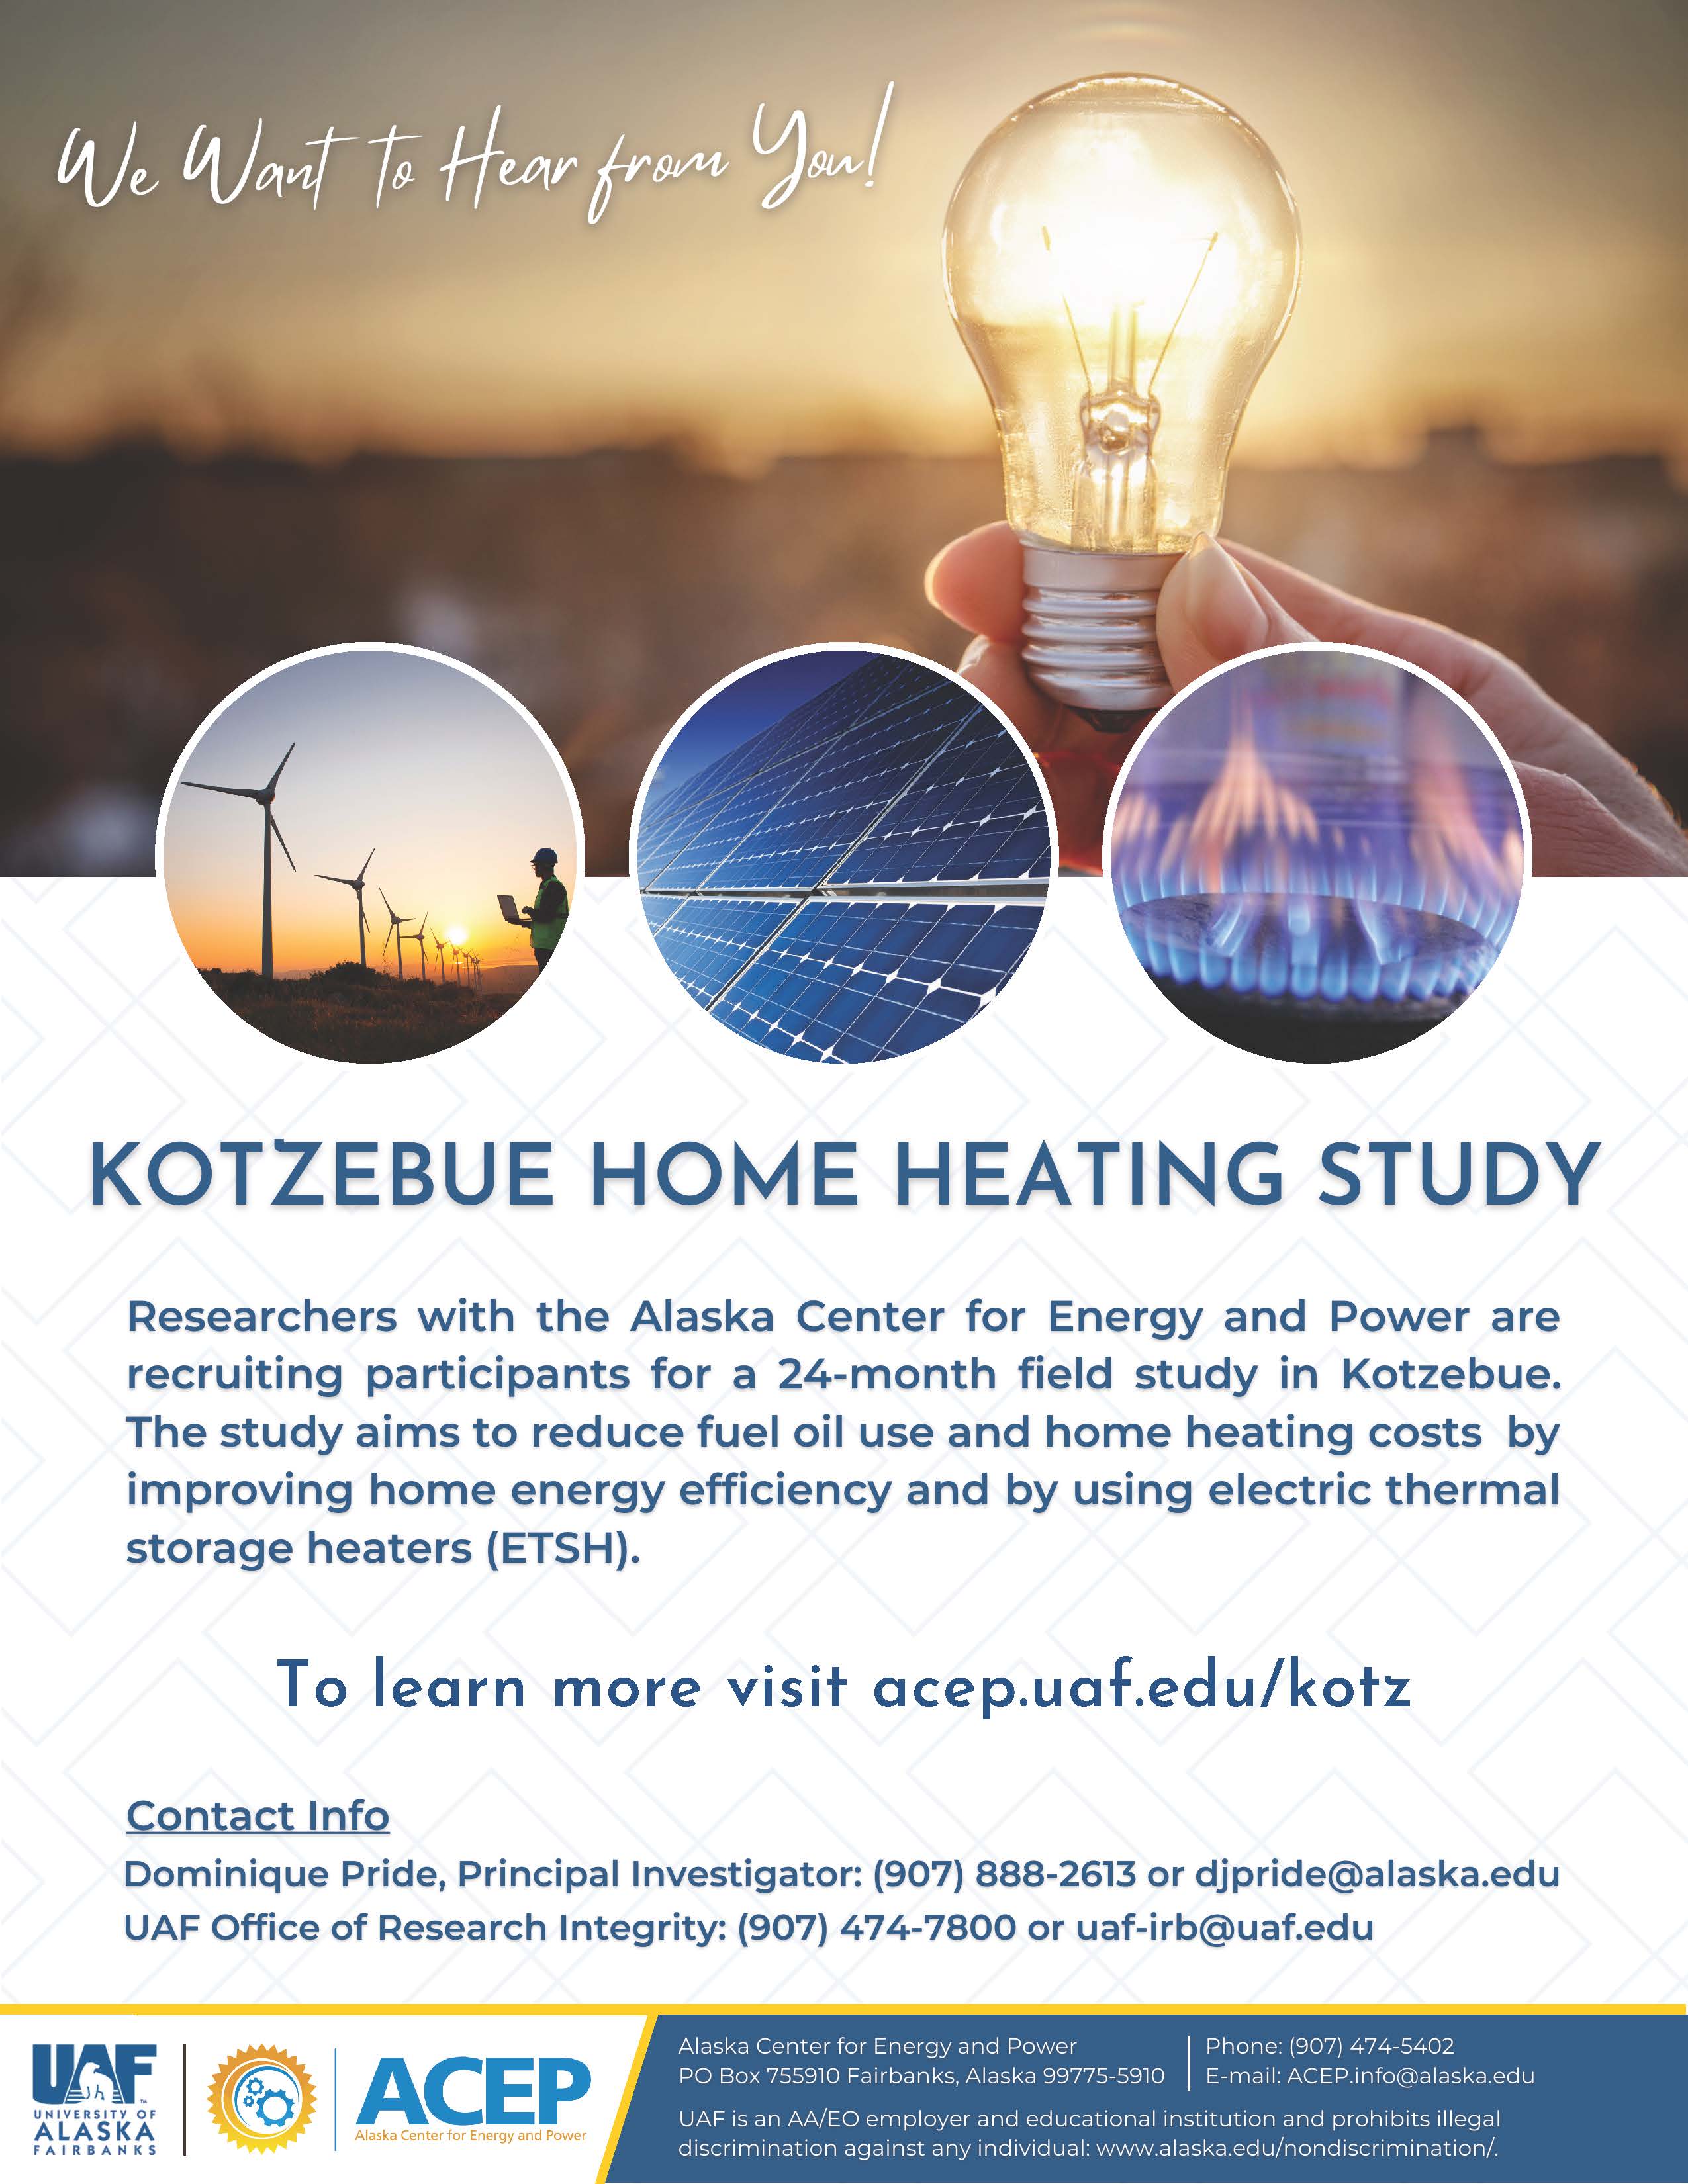 Flyer for the Kotzebue home heating study: information on flyer is written out in article to the left.